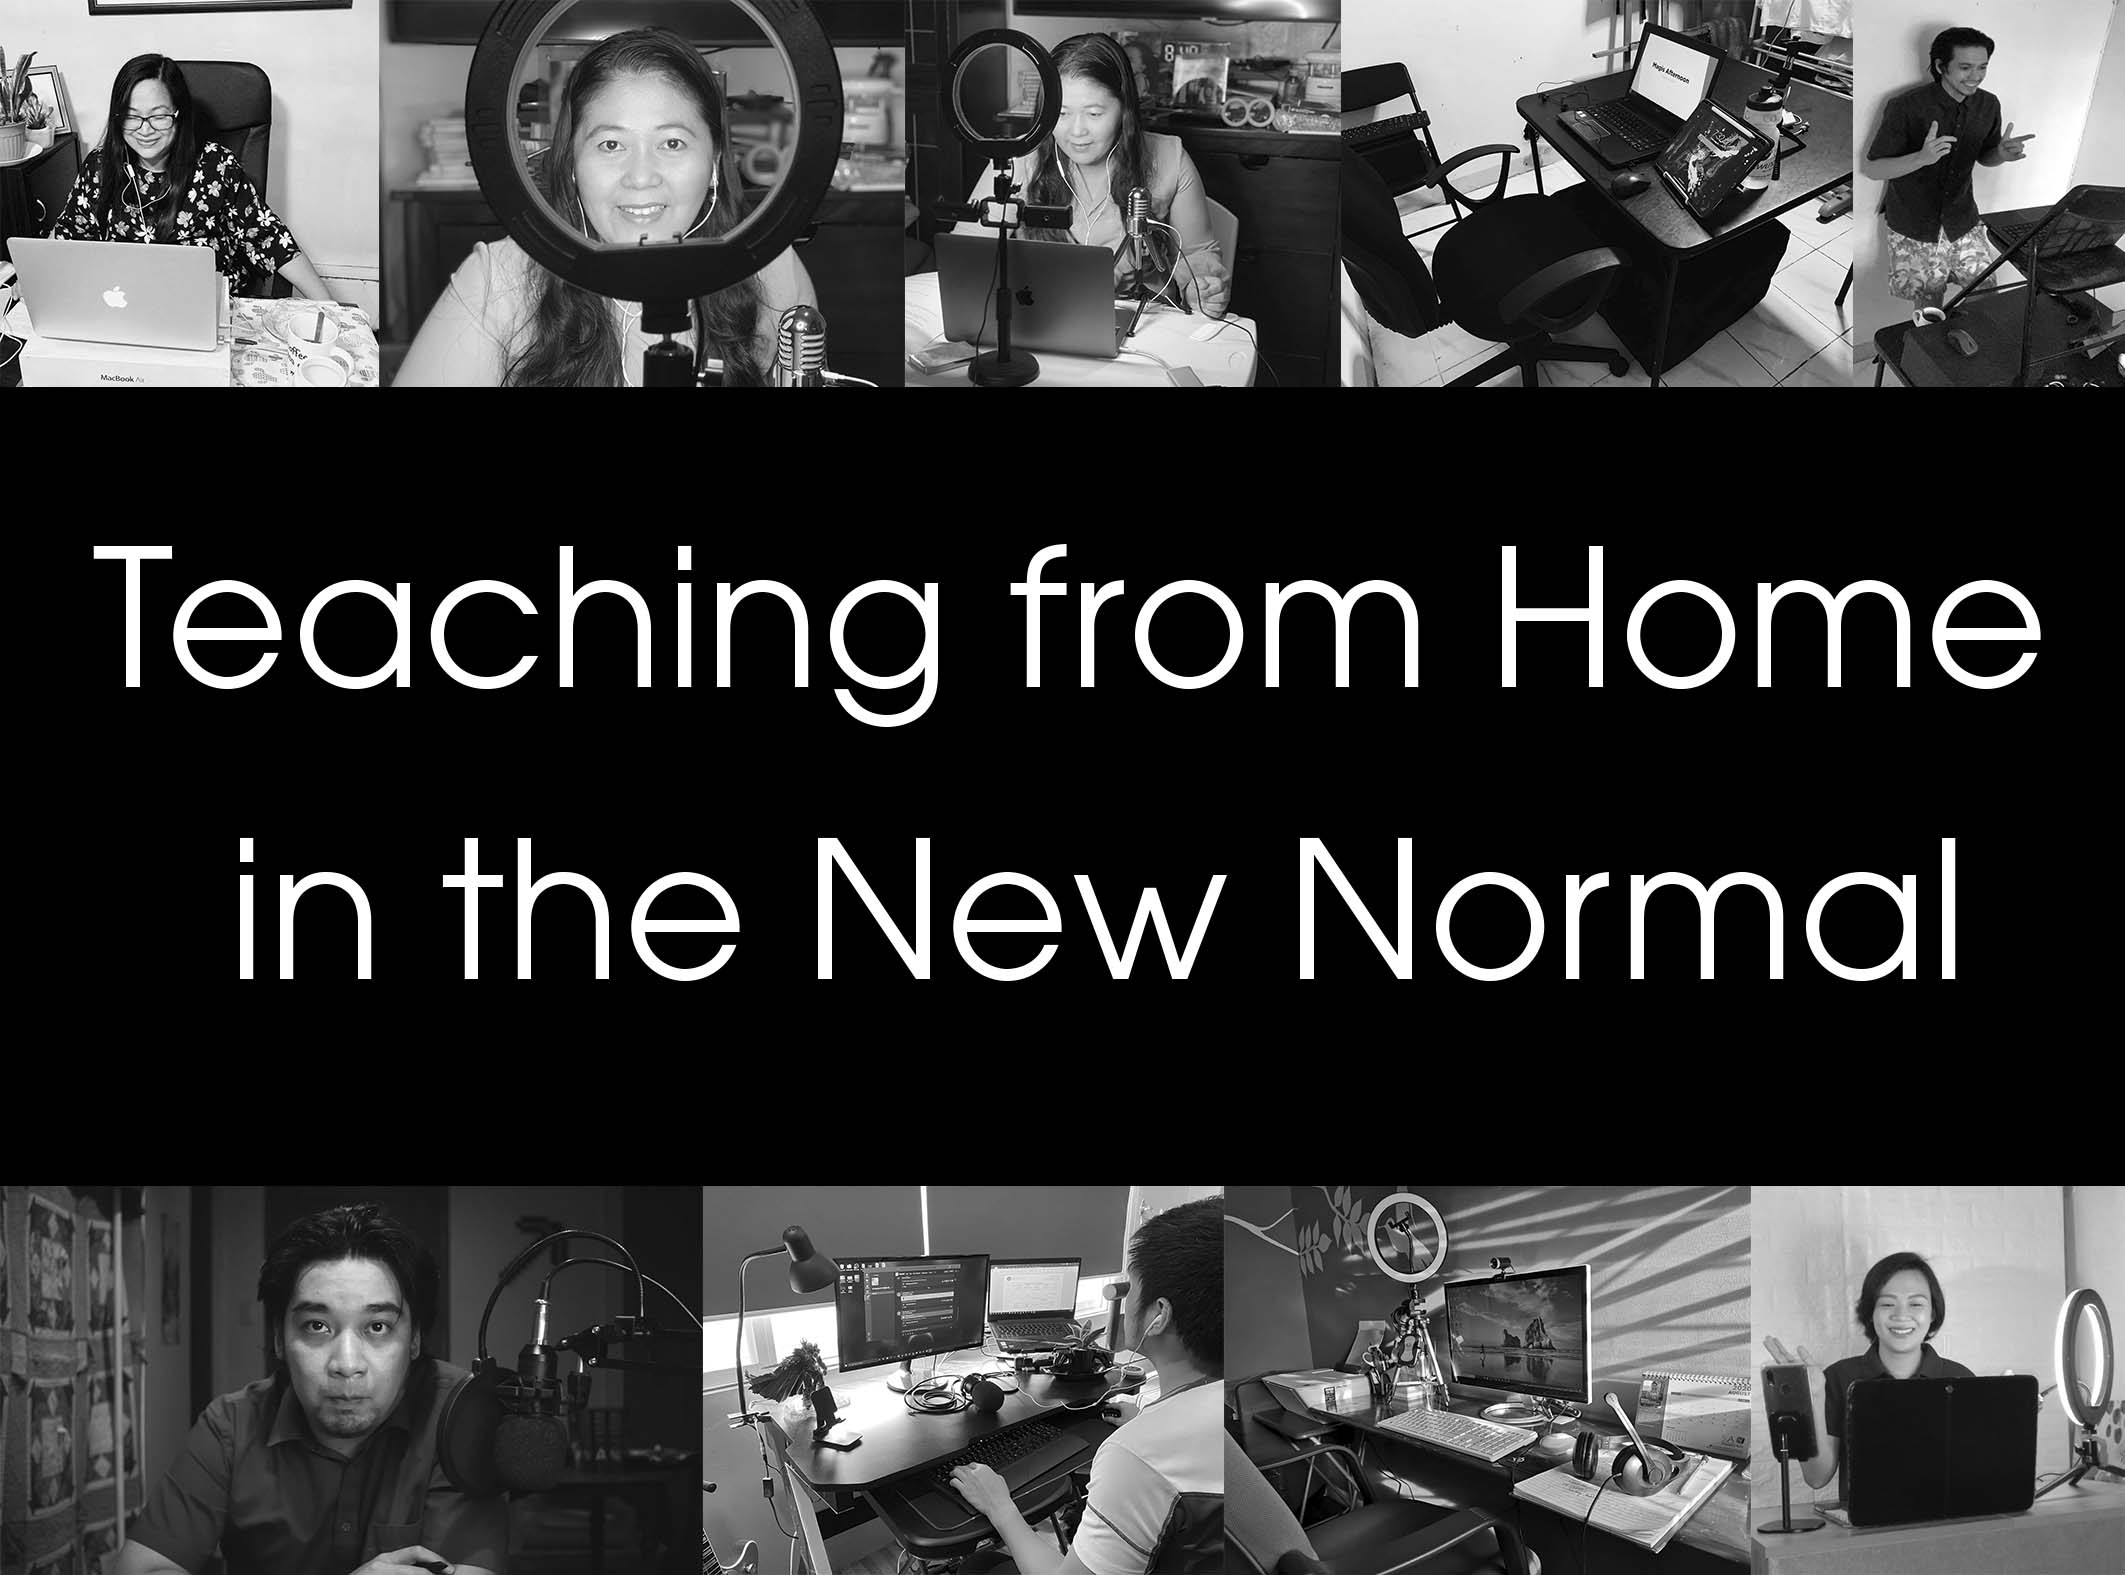 Lights, Camera, Action! Your Teachers are Ready! Teaching from Home in the New Normal